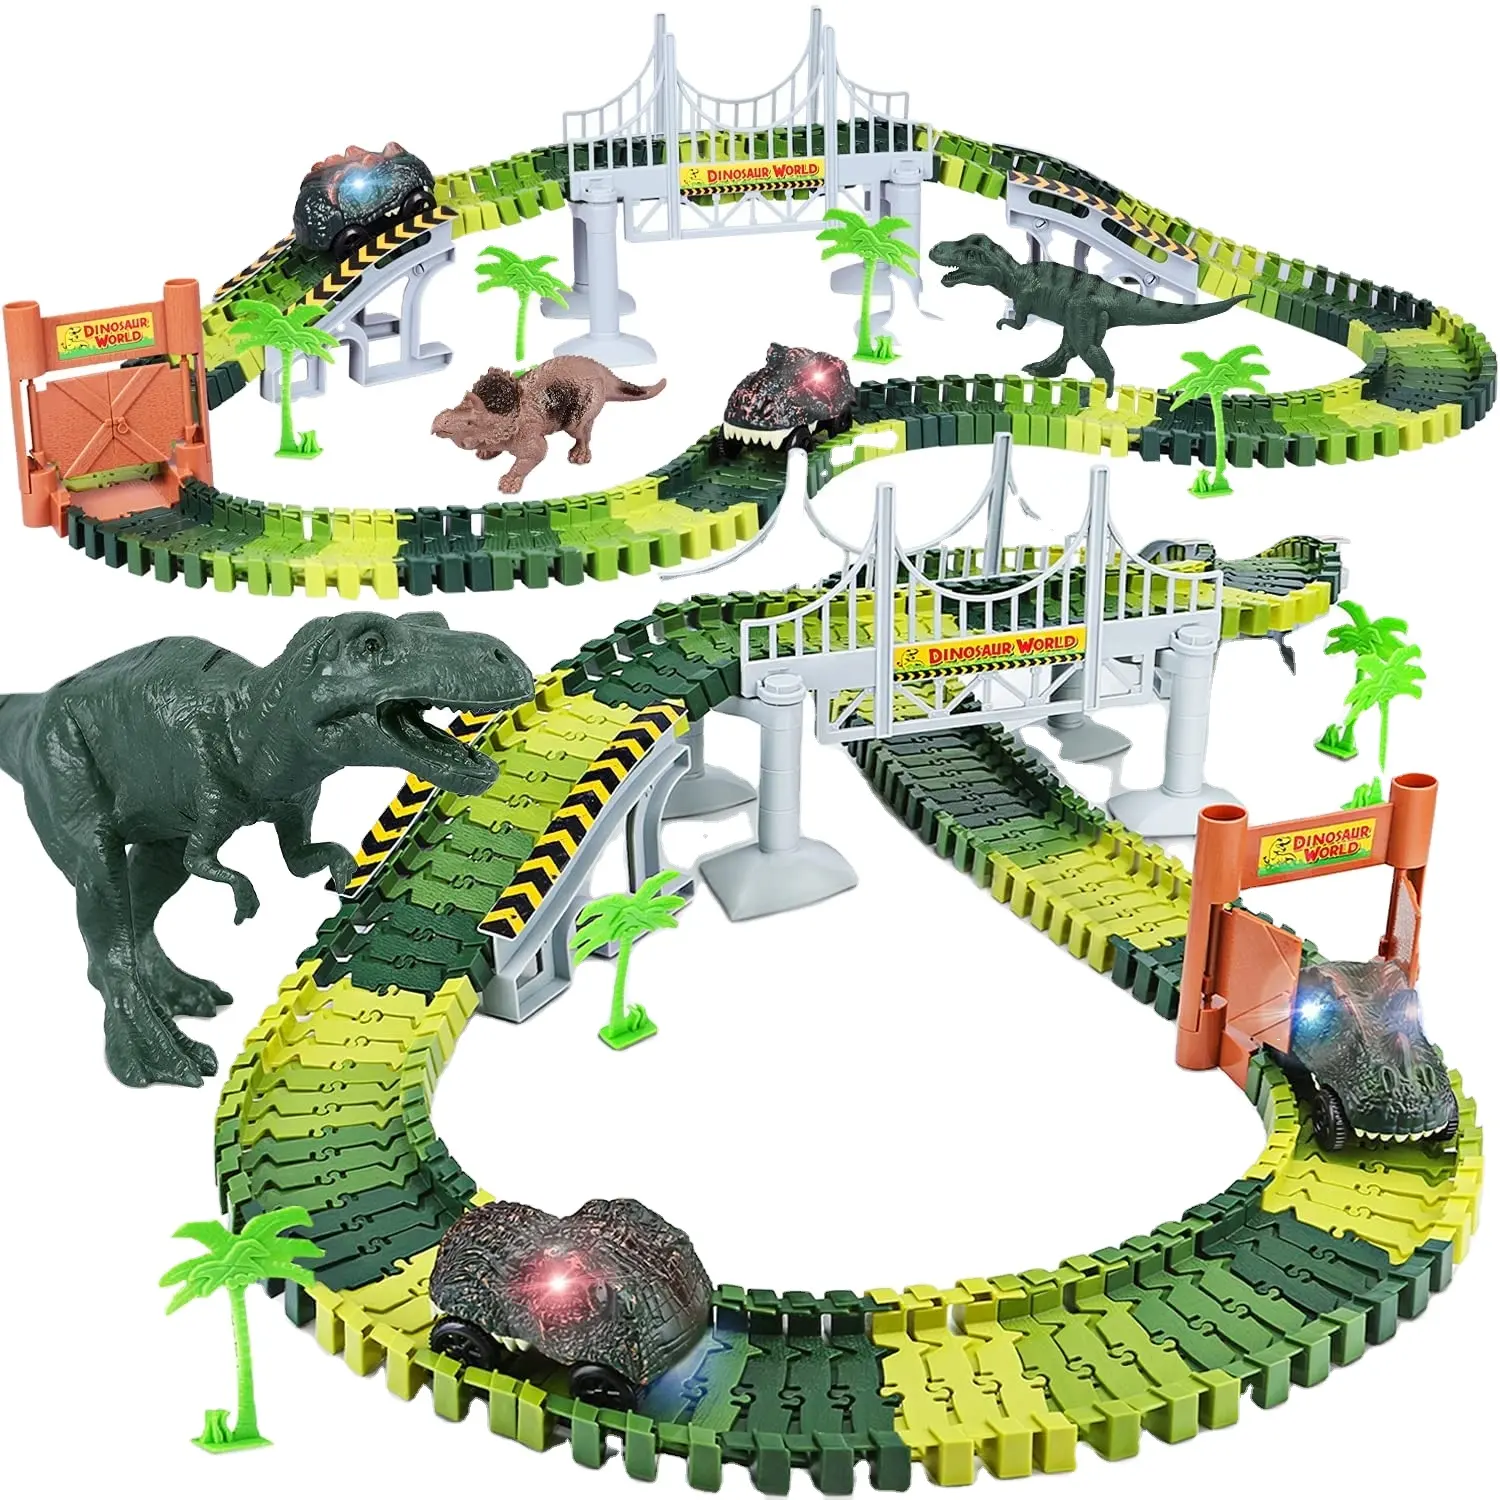 Diy Assembled Race Track Car Electronic Toys Dinosaur Railway Track Racing Toys For Children Gift